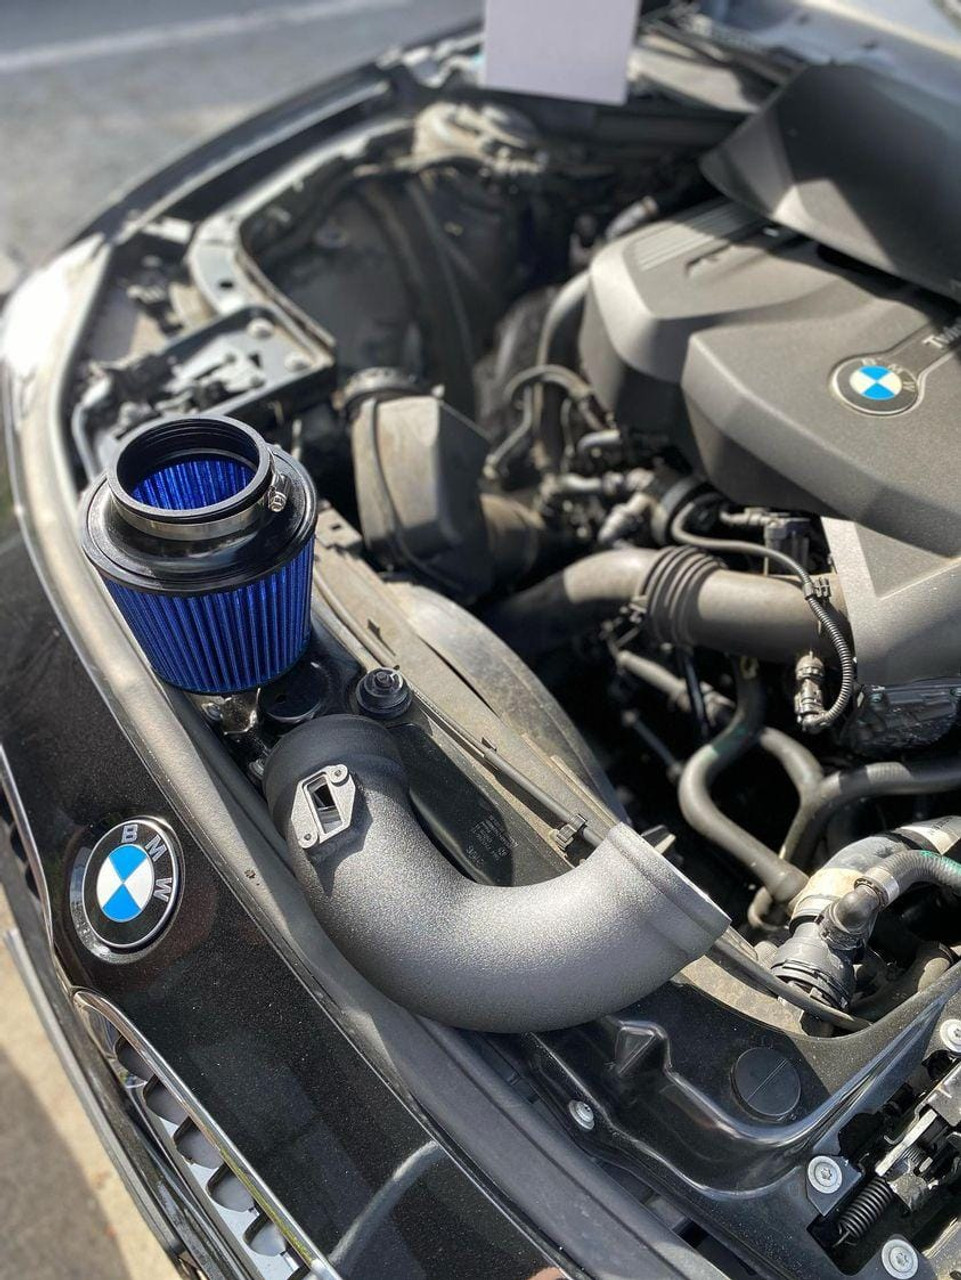 BMW B46/B48 High Flow Air Intake with Shield - Mastery of Art & Design MAD-5061